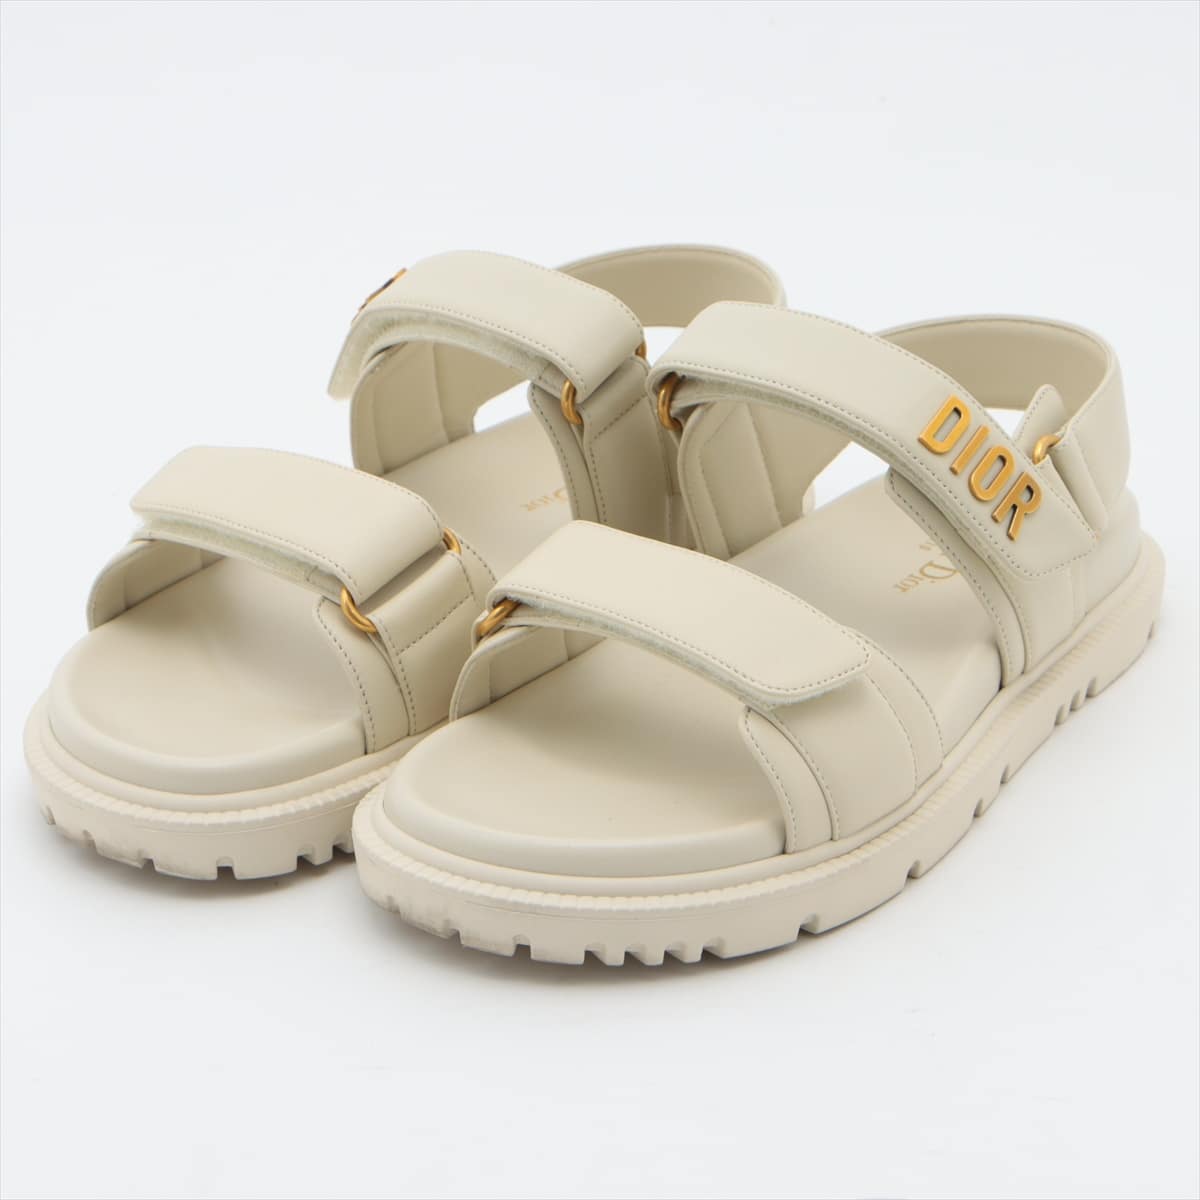 Christian Dior Leather Sandals 37 1/2 Ladies' Ivory DIORACT